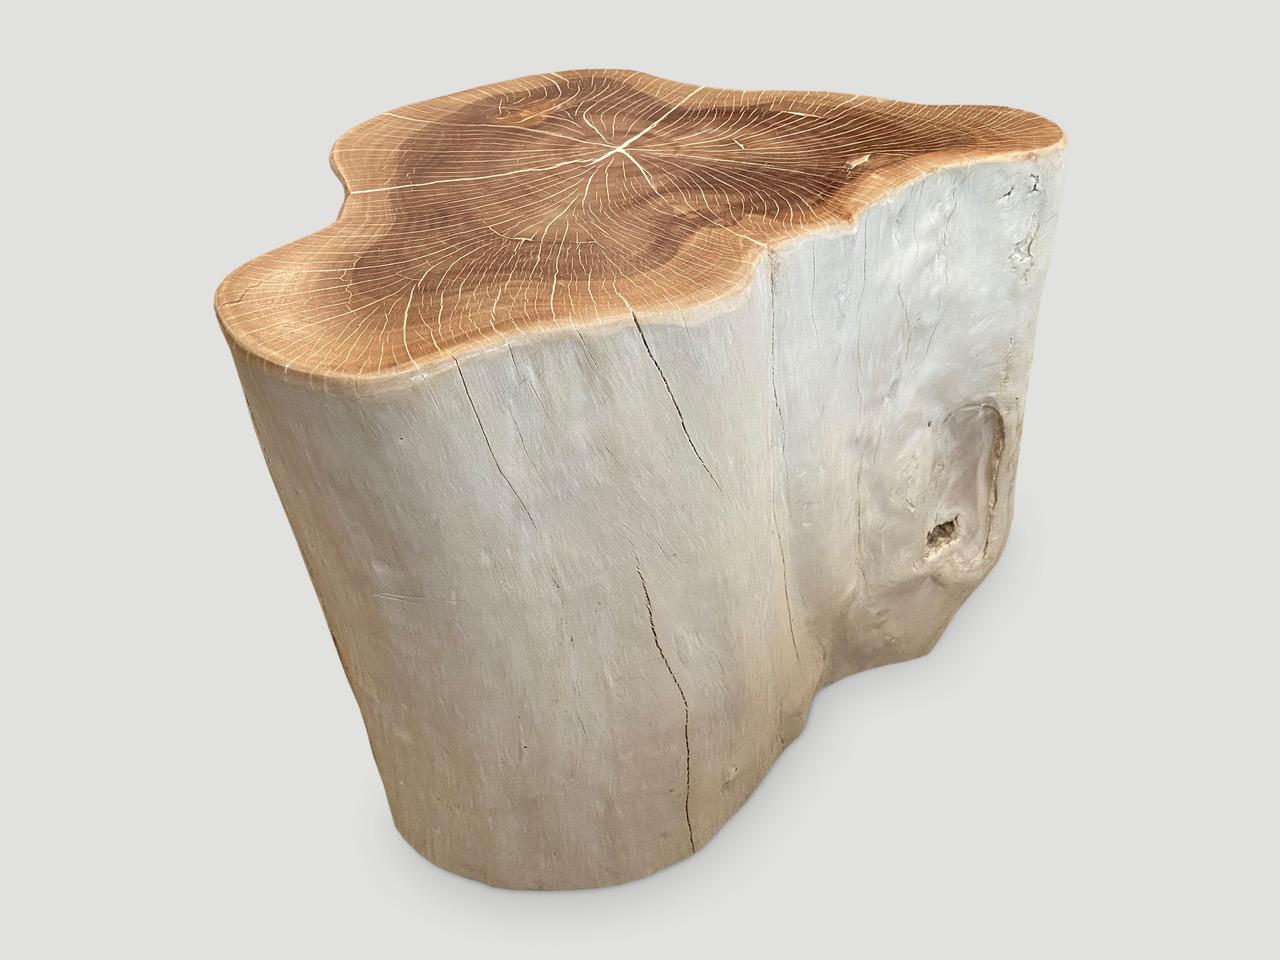 Natural organic shape. We first sanded and then bleached the sides whilst leaving the top natural, exposing the beautiful grain of the wood.

Own an Andrianna Shamaris original.

Andrianna Shamaris. The Leader In Modern Organic Design.